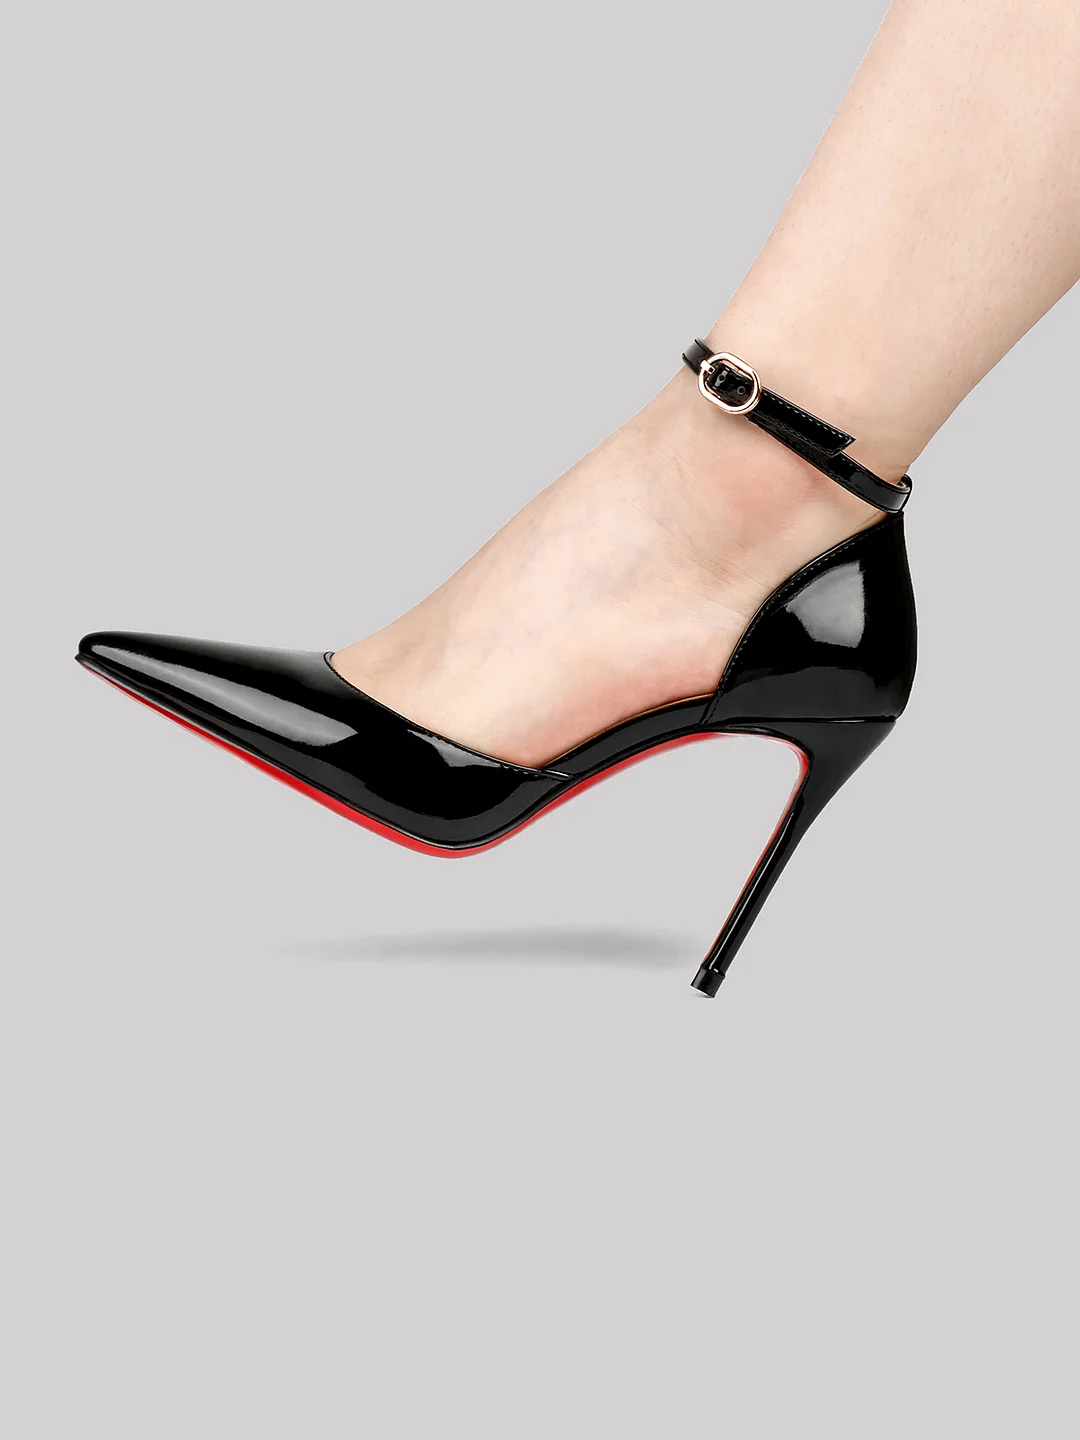 100mm Women's Ankle Strap Pointed Toe Pumps Wedding Party Red Bottoms High Heels Stiletto Shoes